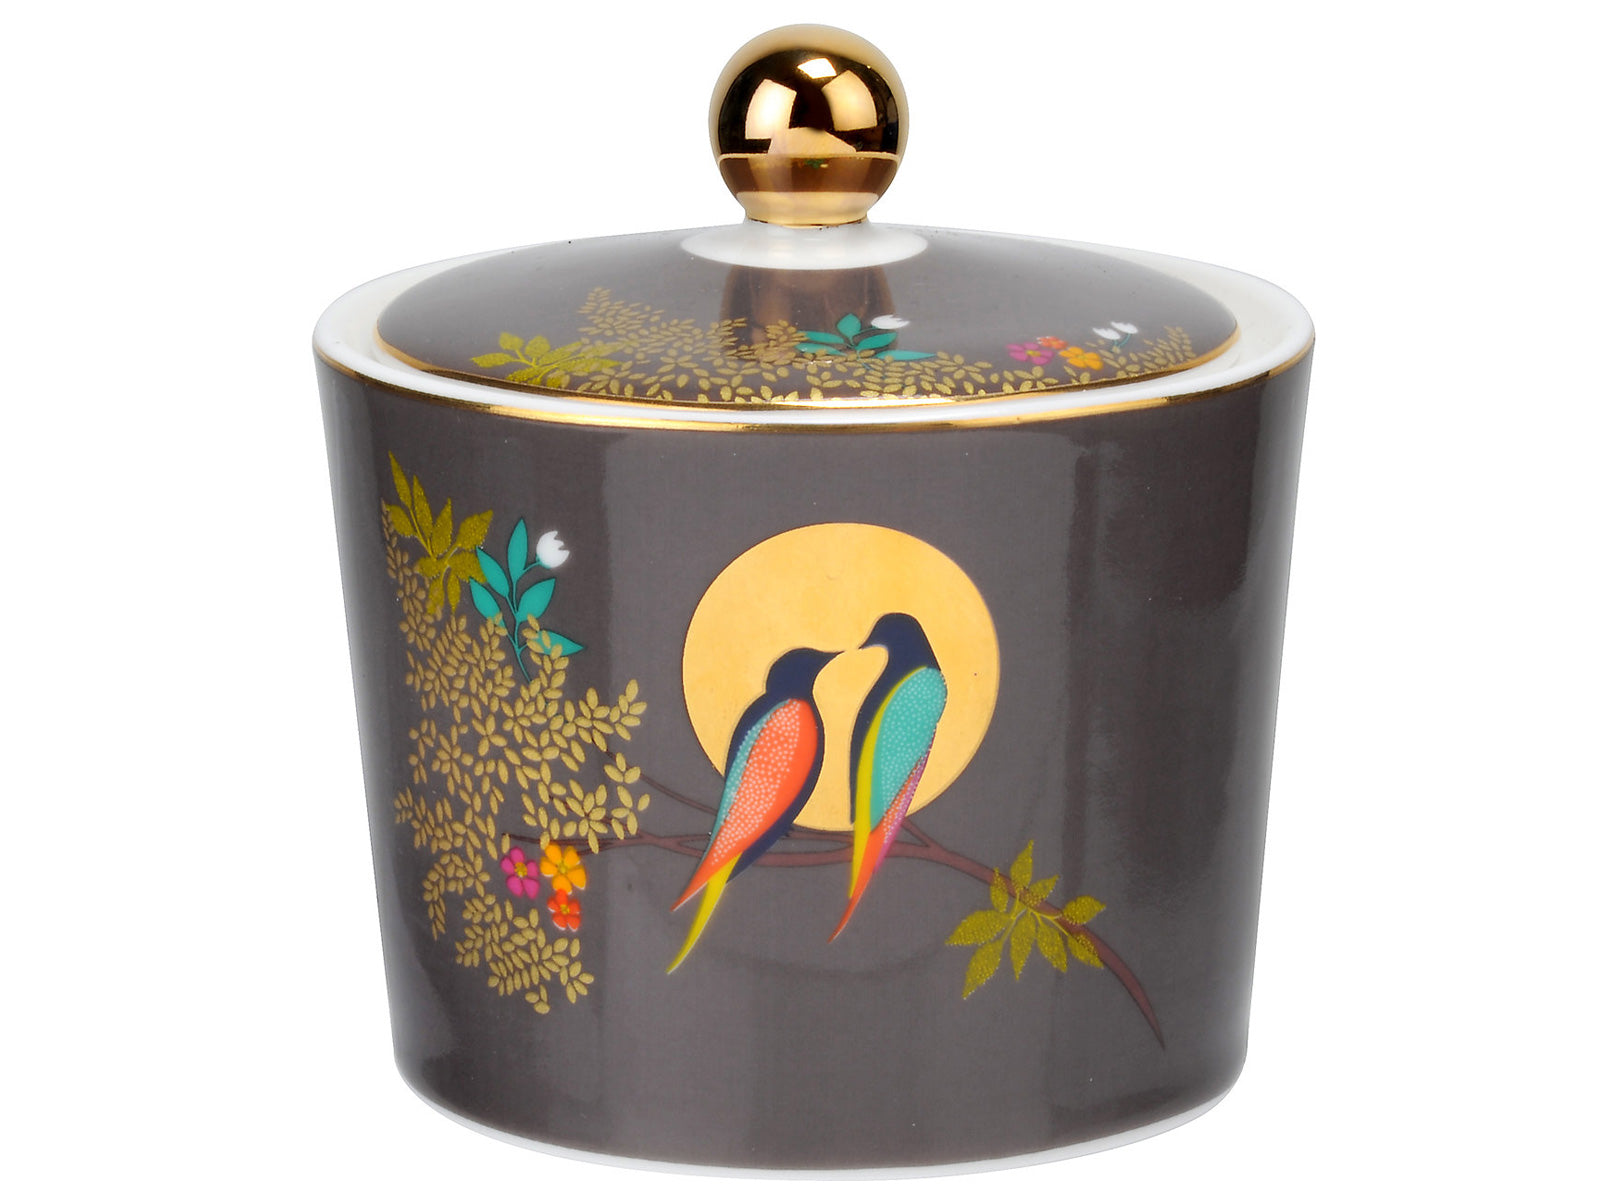 A porcelain sugar pot with matching lid in dark grey, with gold details and two birds in front of a moon